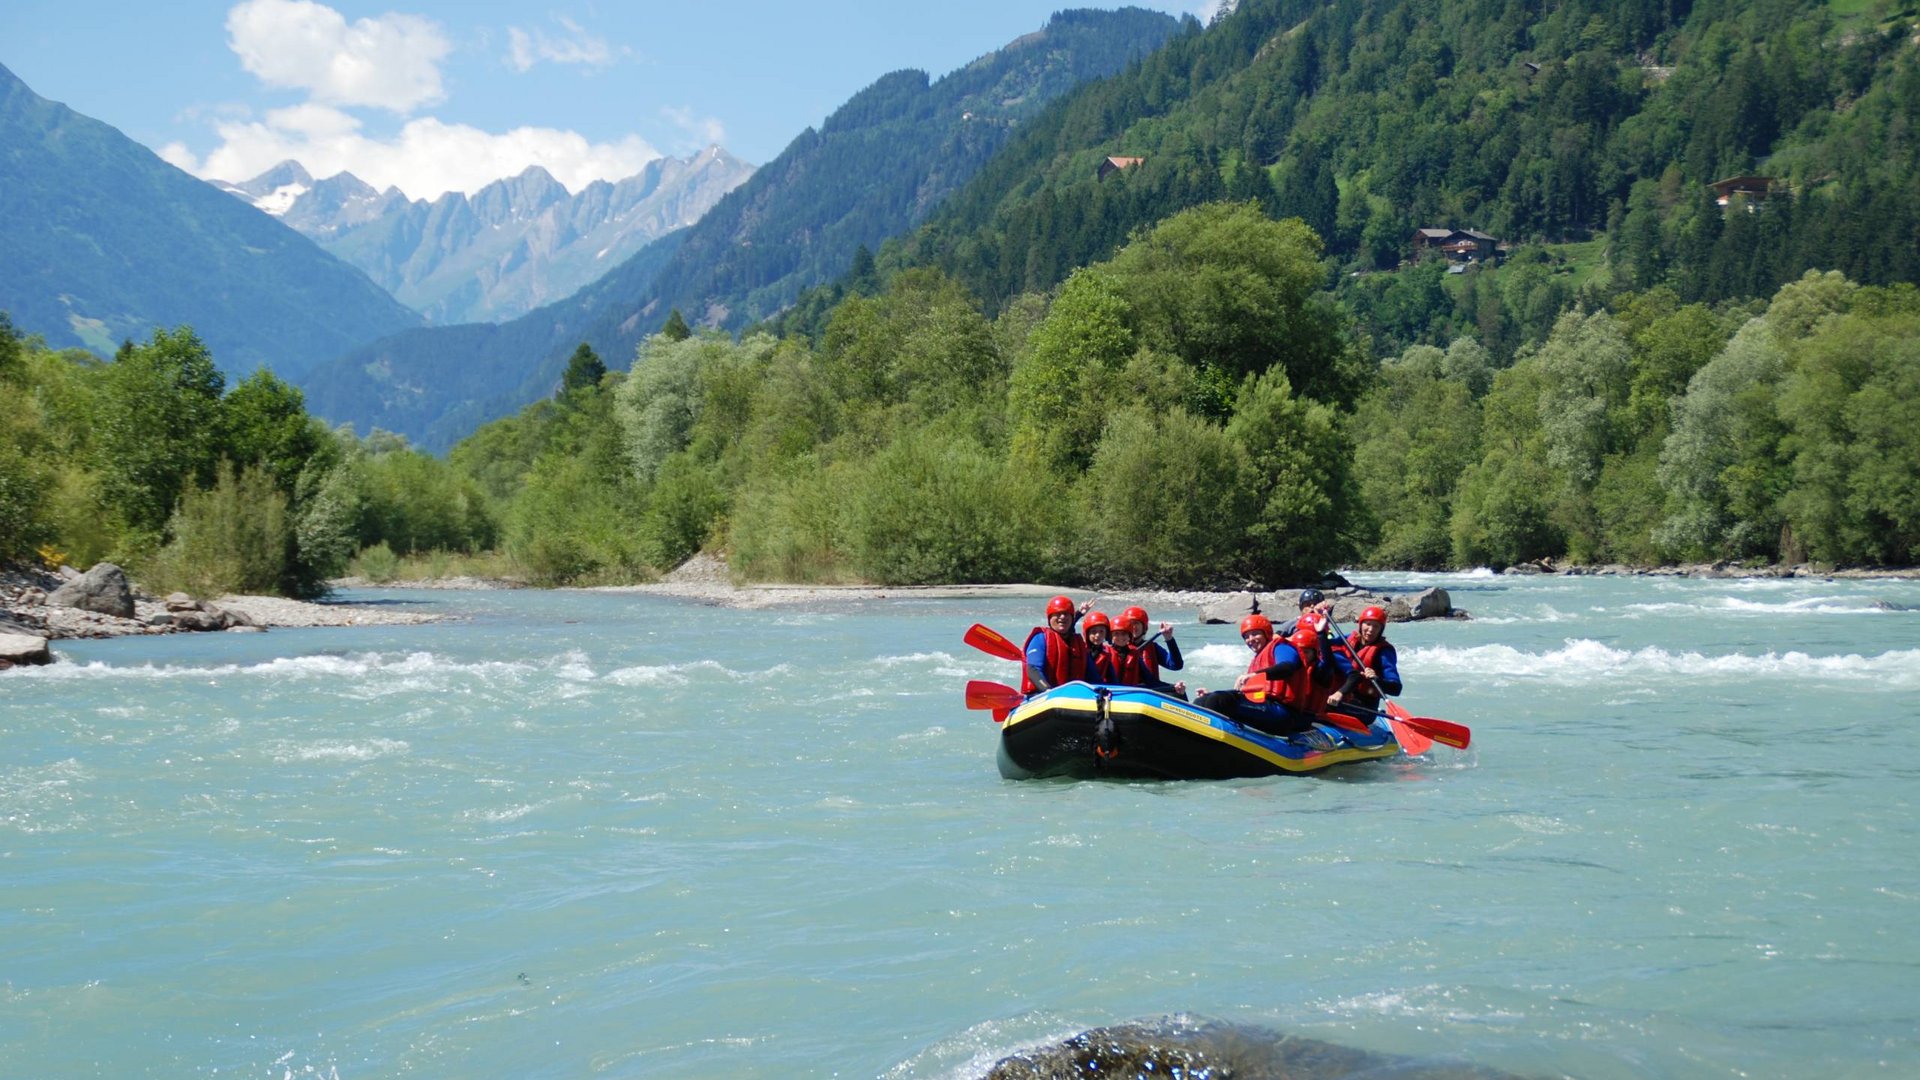 Rafting in Austria – lively fun